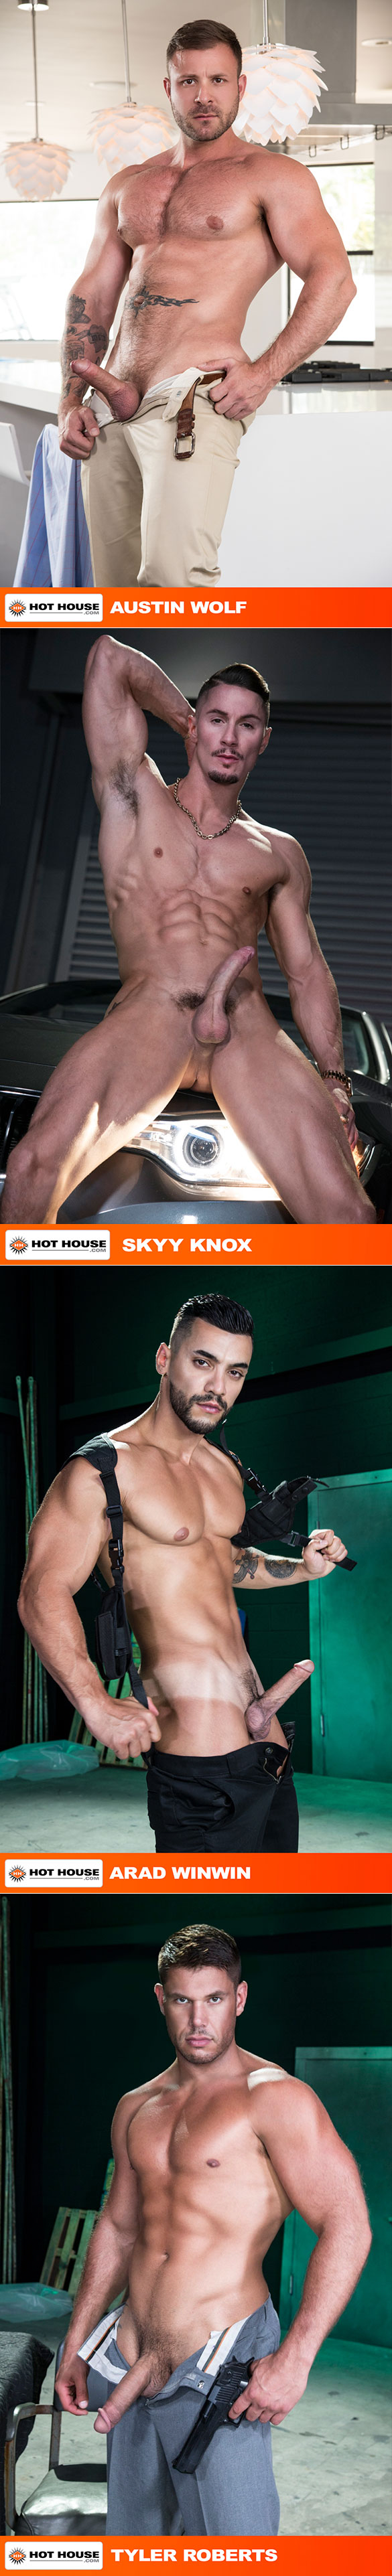 HotHouse: Skyy Knox gets fucked hard by Austin Wolf, Arad Winwin and Tyler Roberts in "The Fixer"